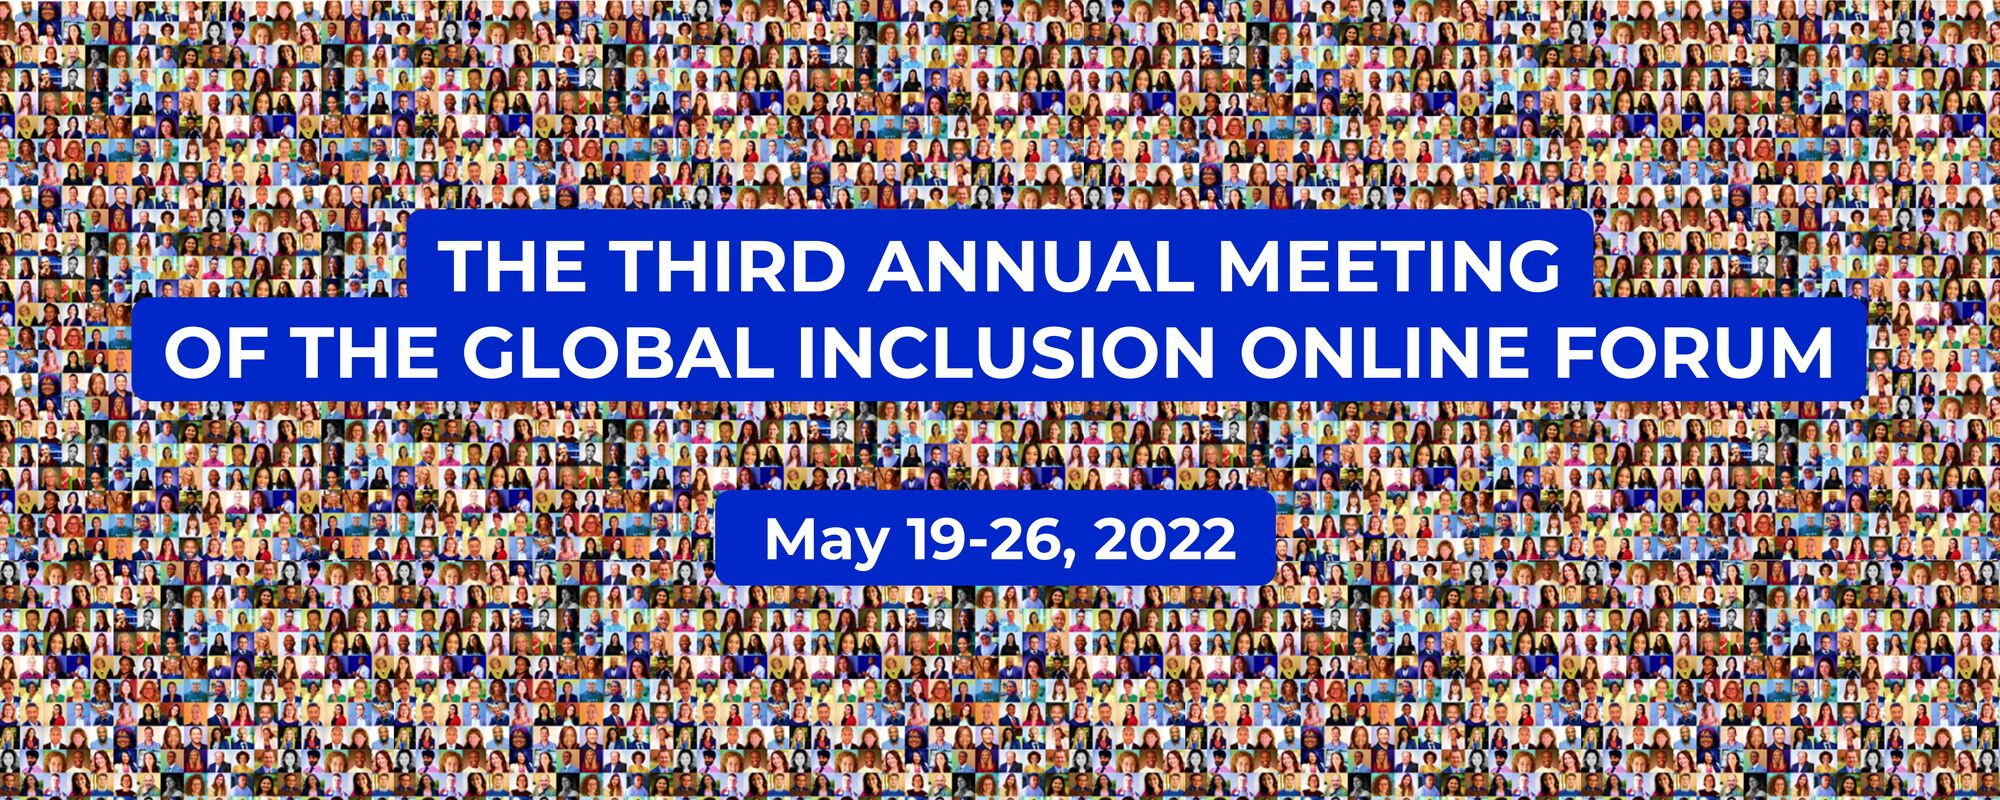 THE THIRD ANNUAL MEETING OF THE GLOBAL INCLUSION ONLINE FORUM TO TAKE PLACE ON MAY 19-26, 2022